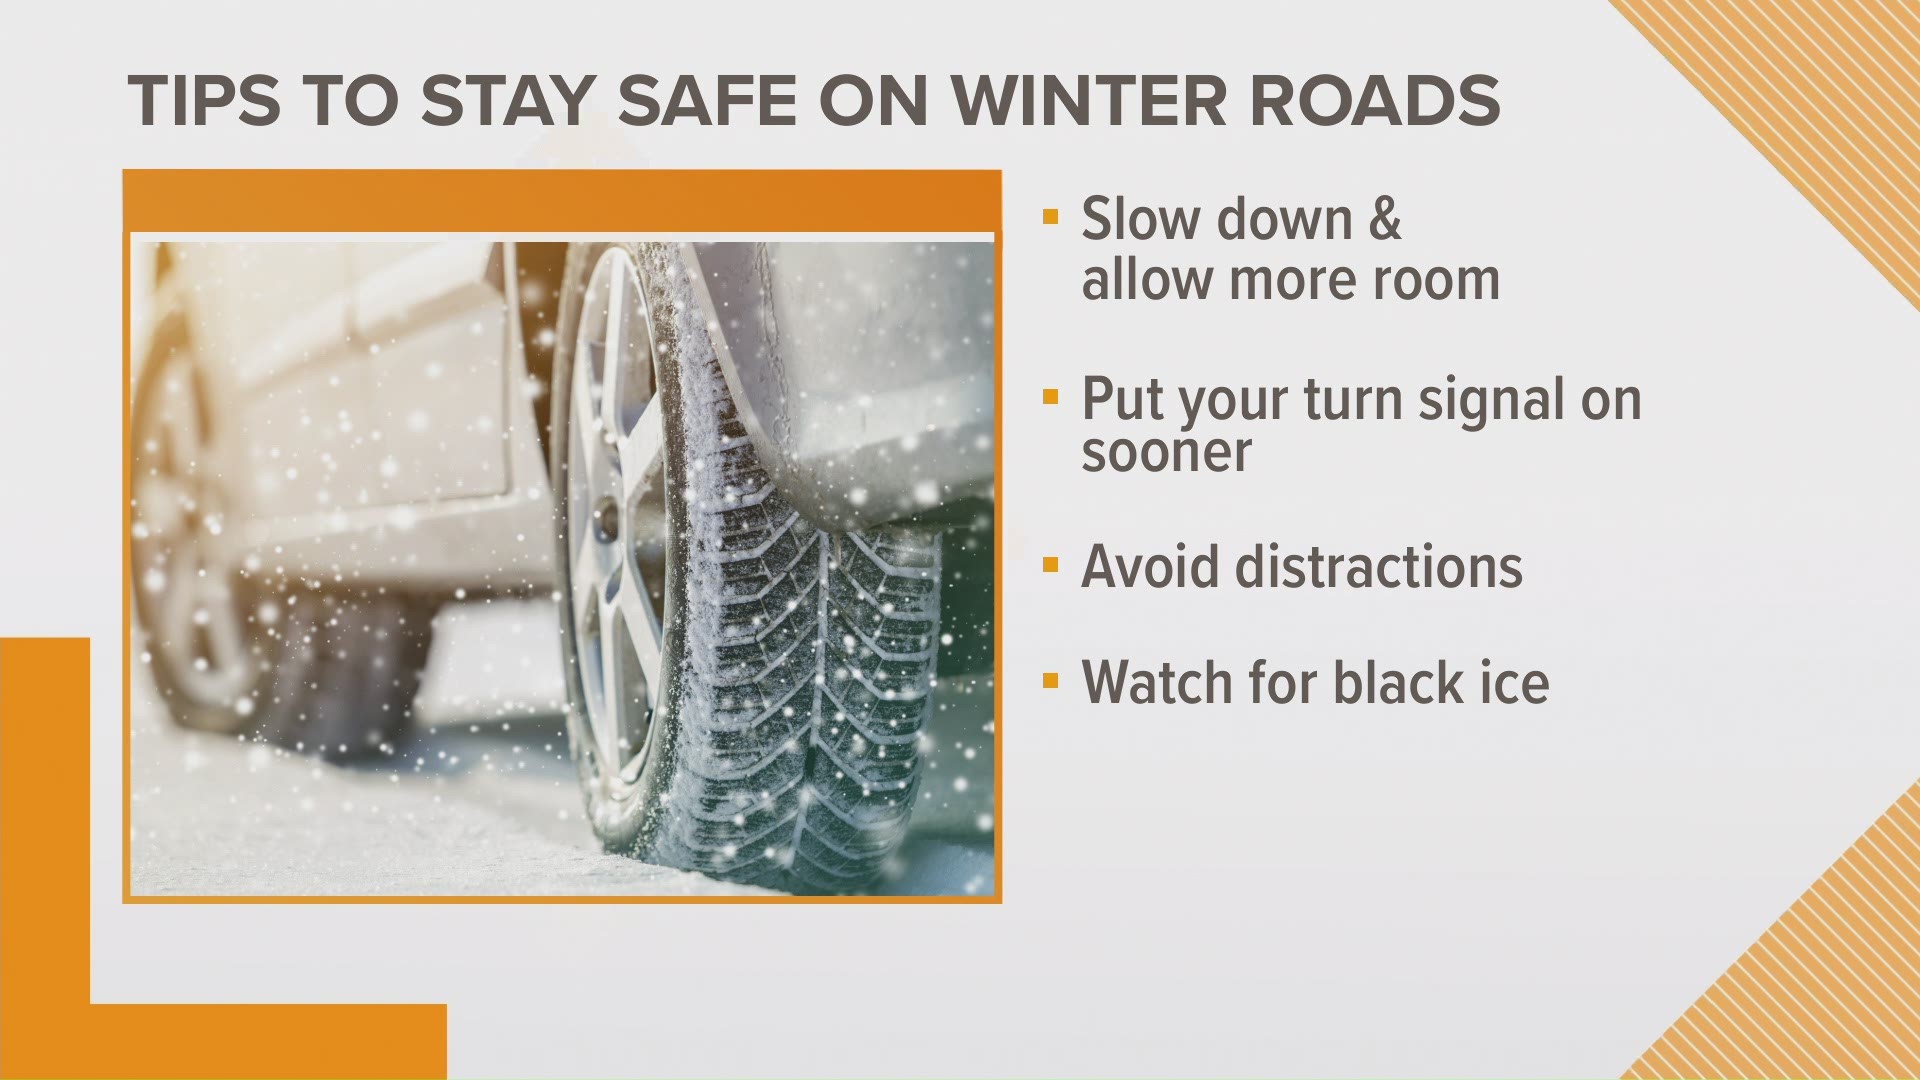 Michigan State Police share tips on how to stay safe on winter roads.